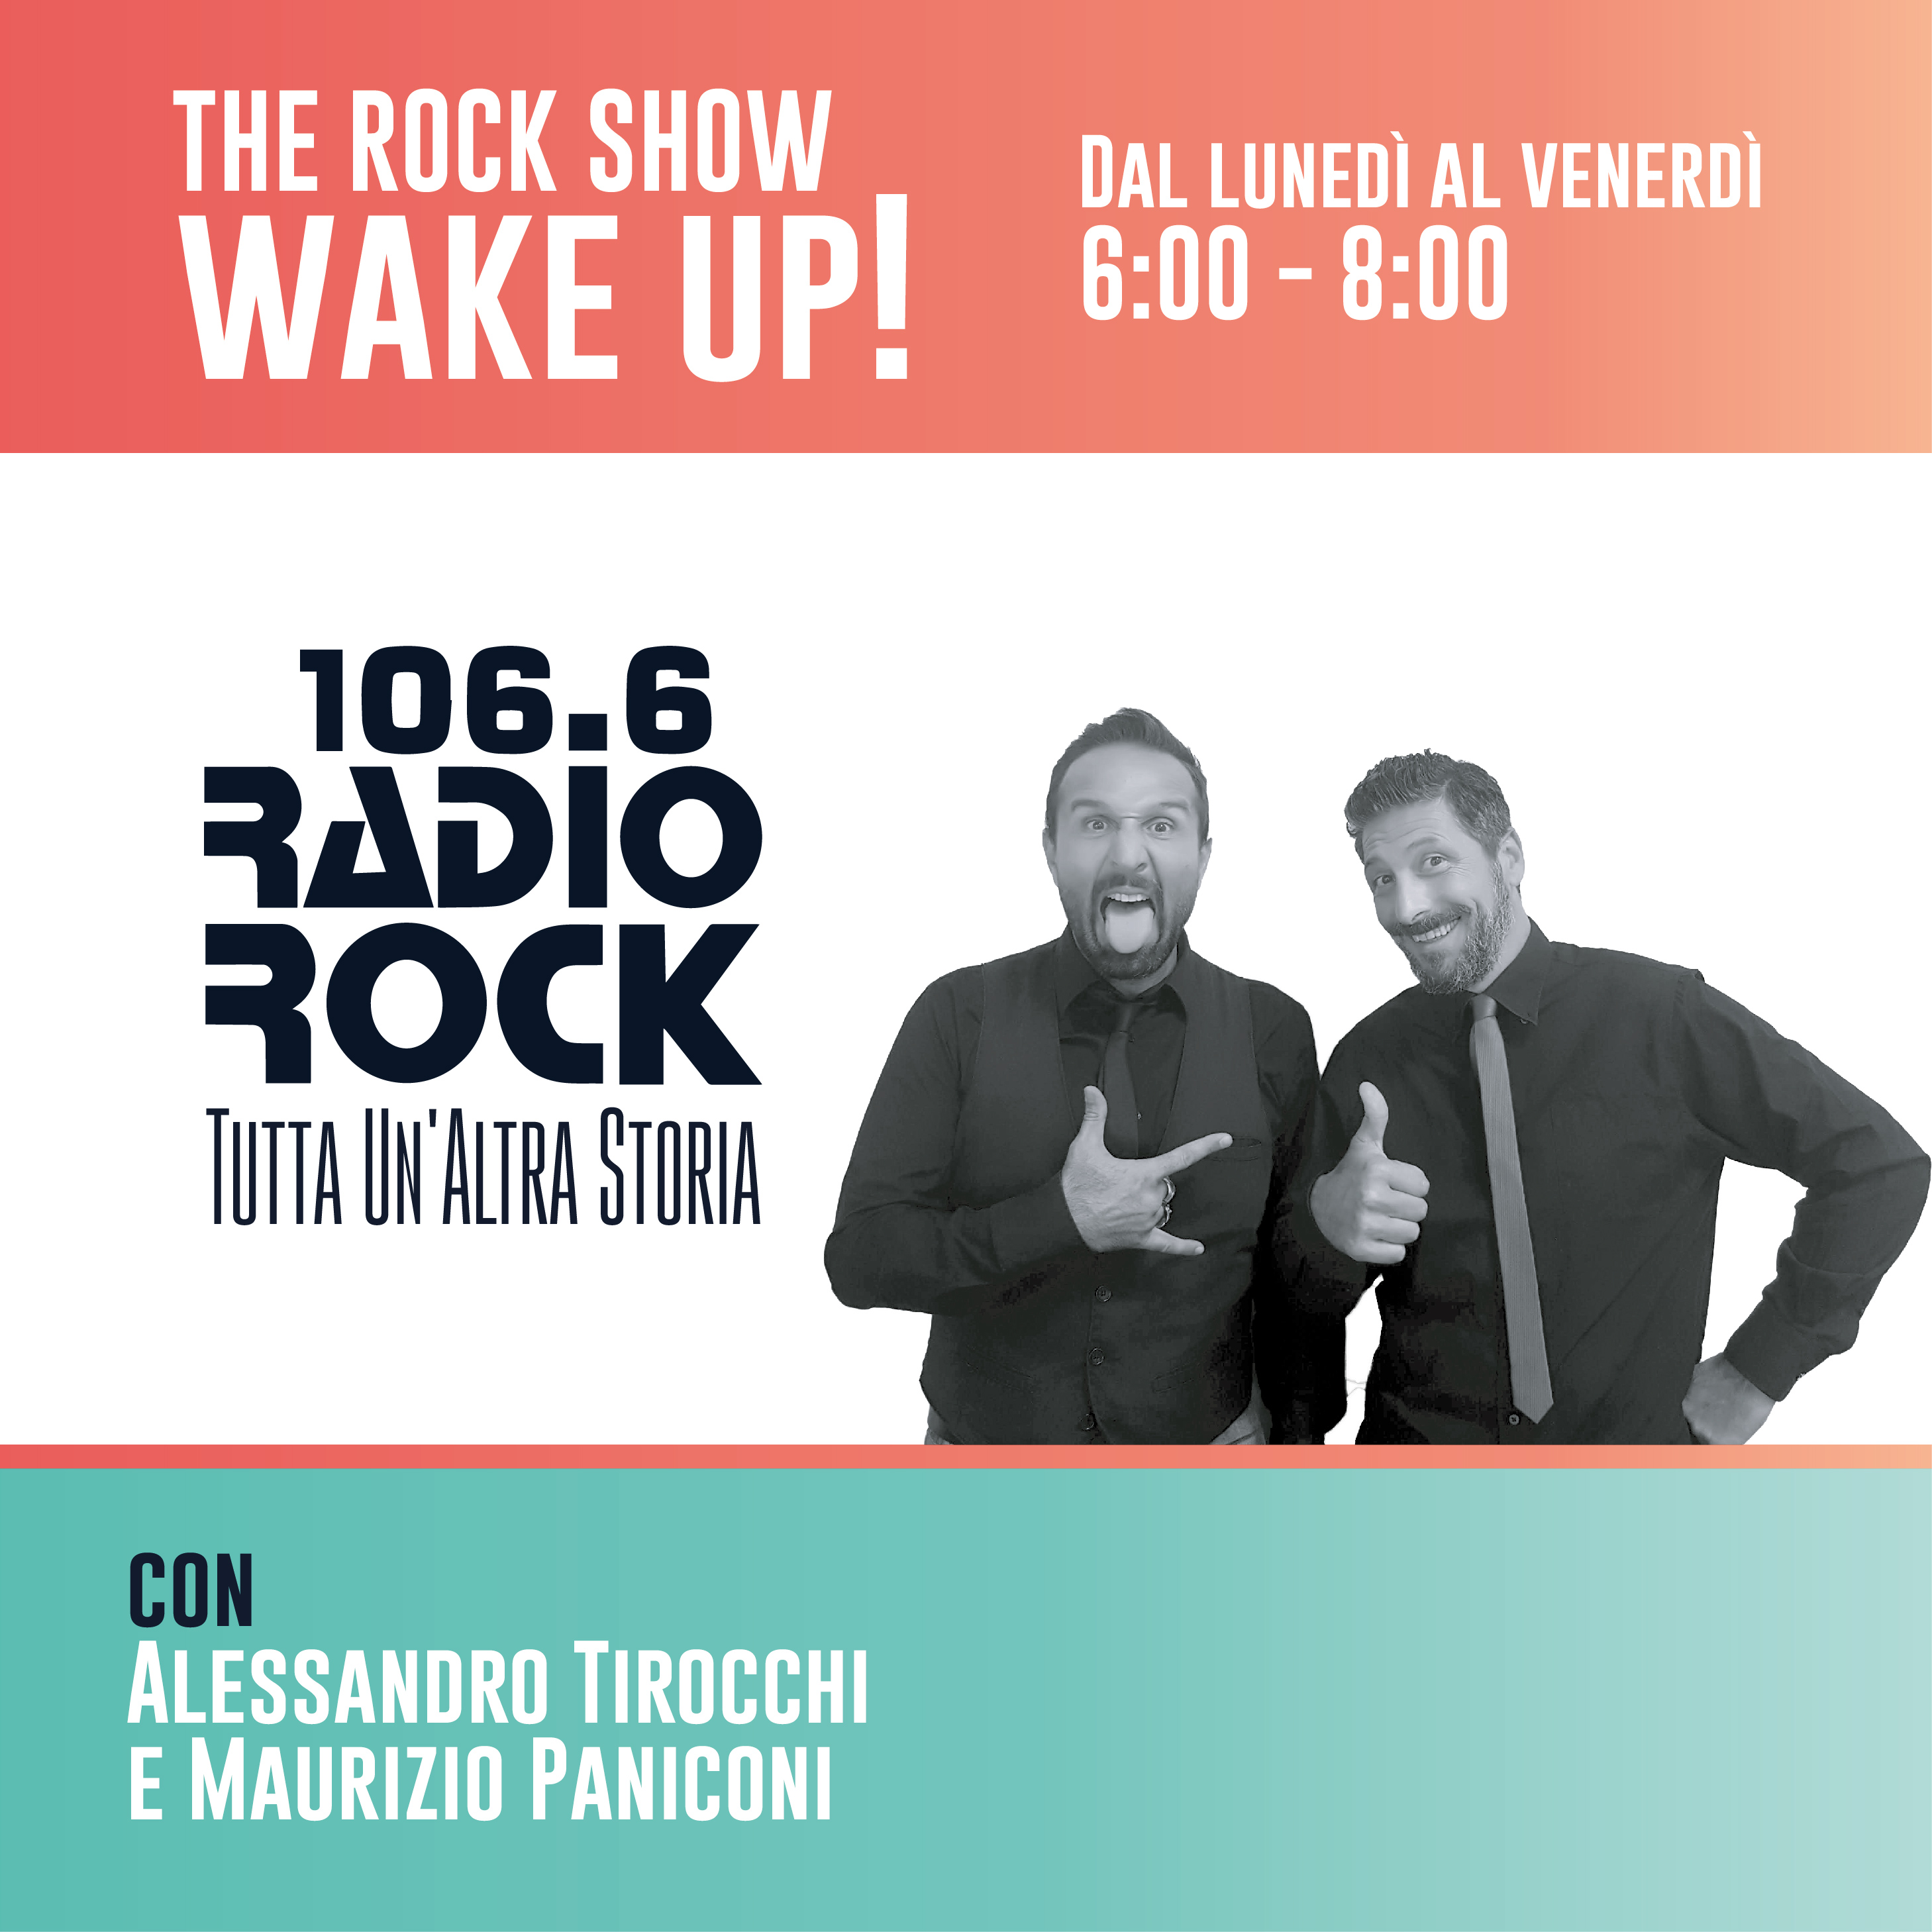 The Rock Show: Wake Up! (14-10-20)